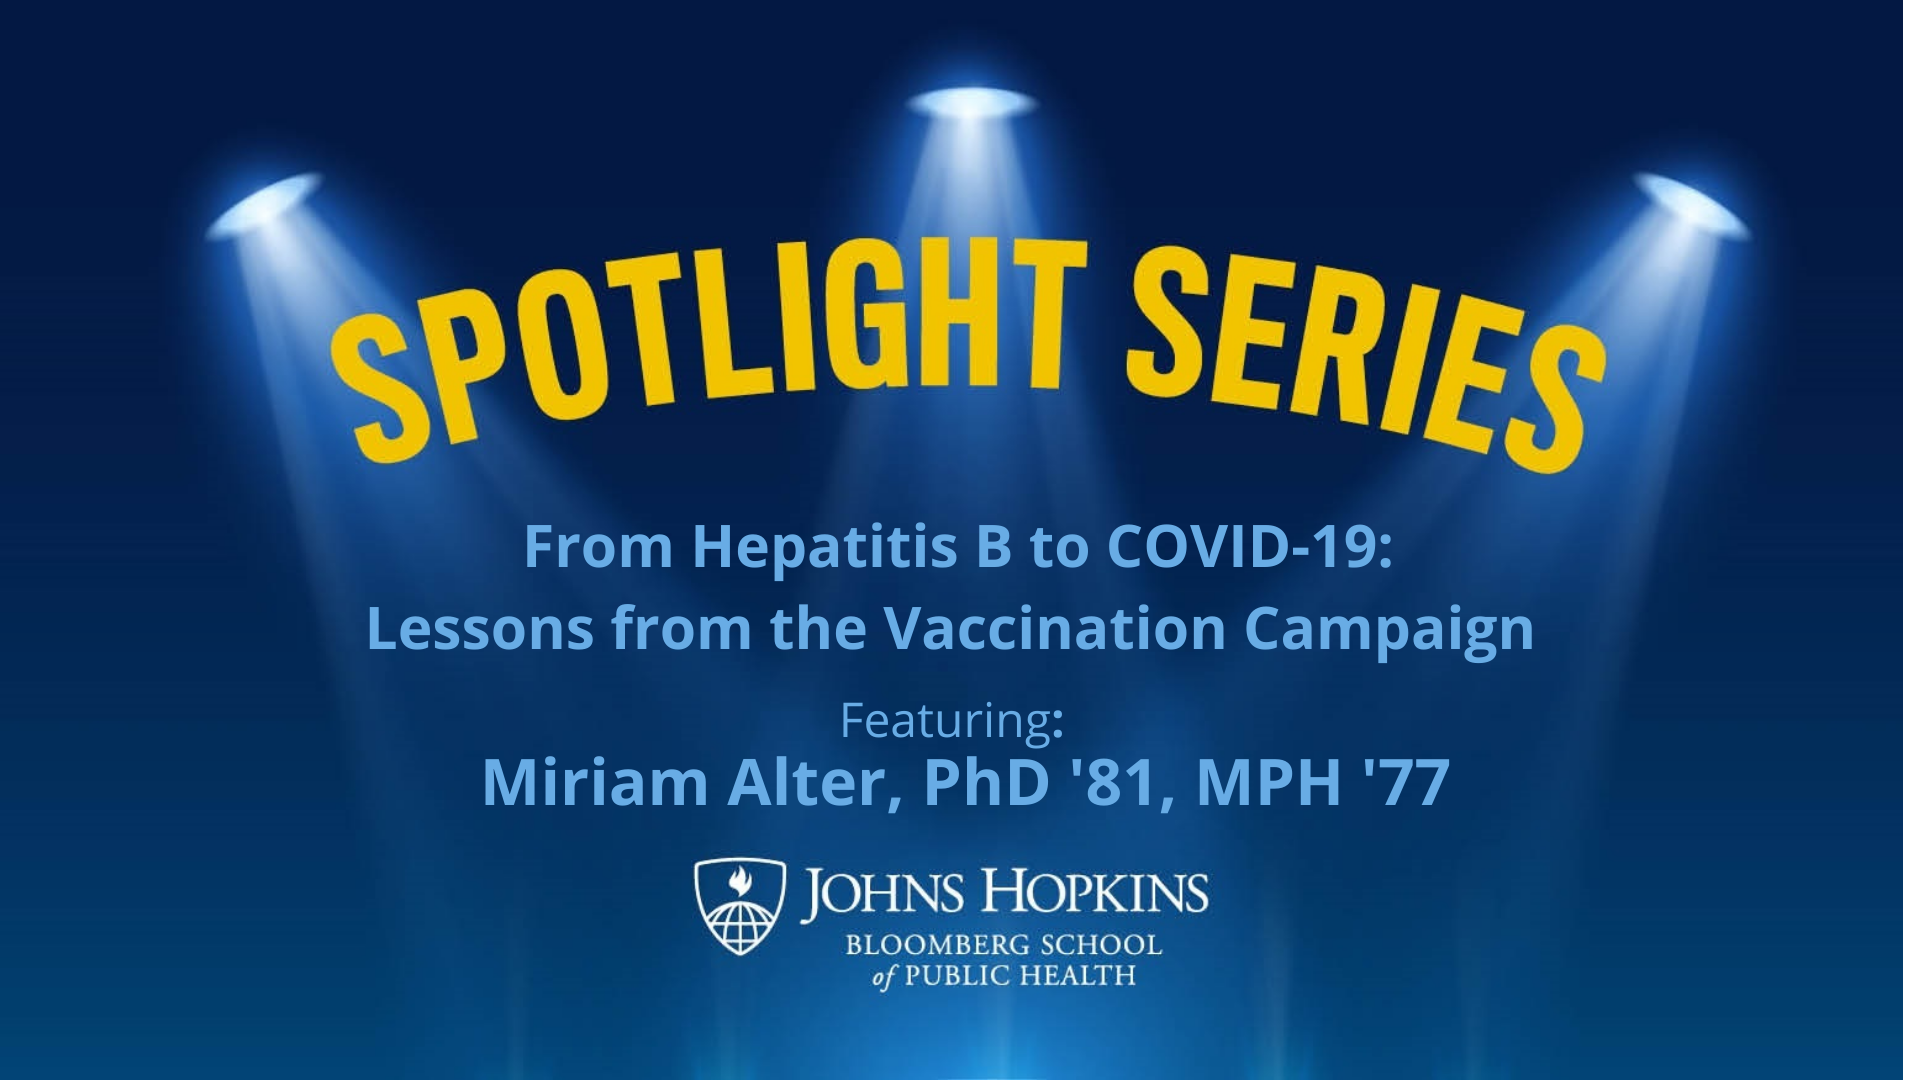 From Hepatitis B to COVID-19: Lessons from the Vaccination Campaign 